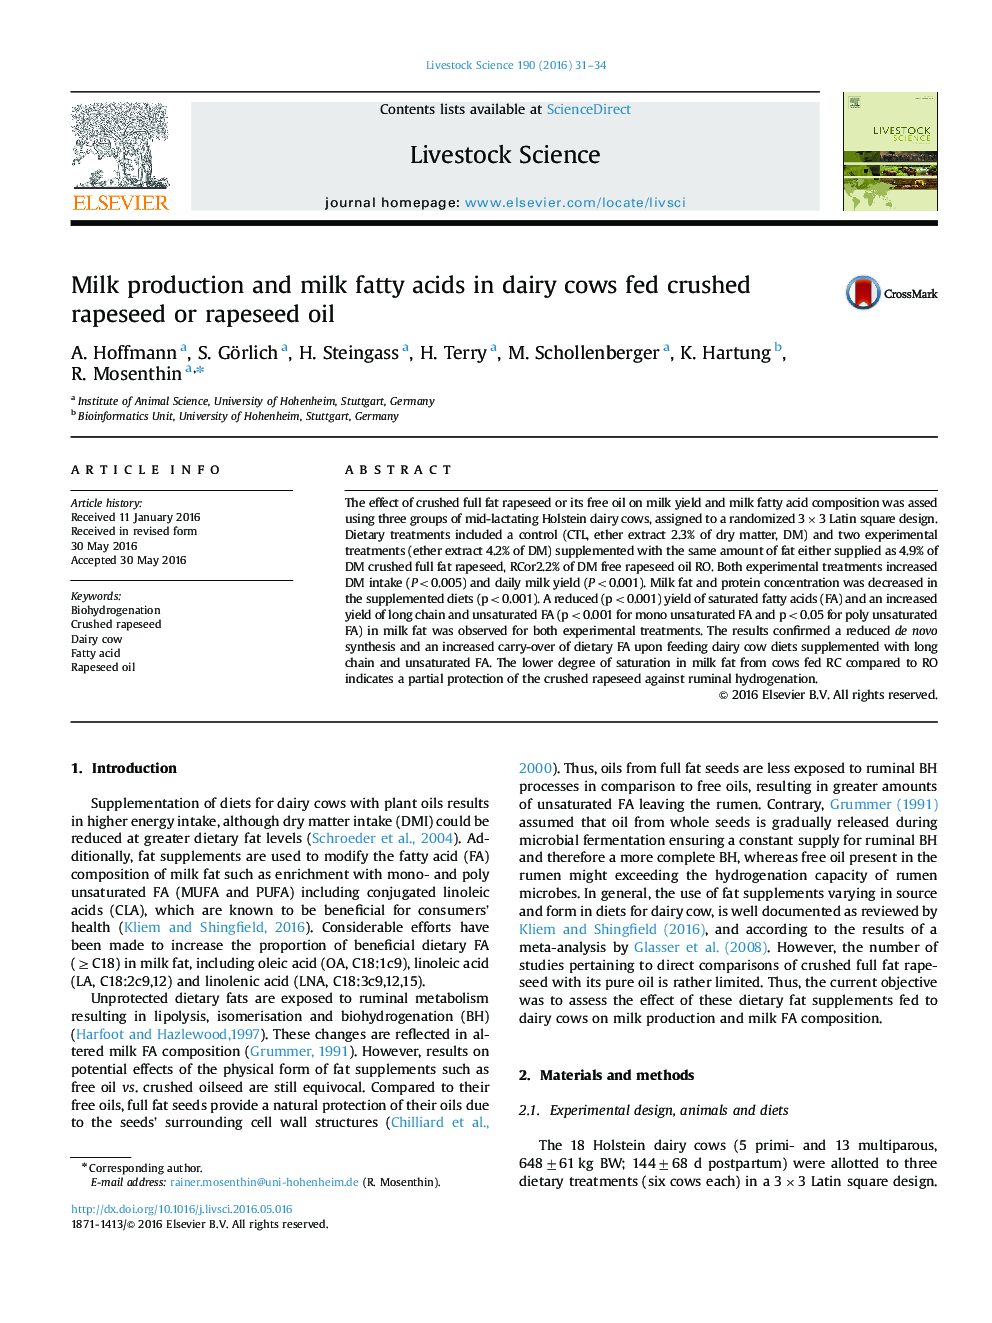 Milk production and milk fatty acids in dairy cows fed crushed rapeseed or rapeseed oil